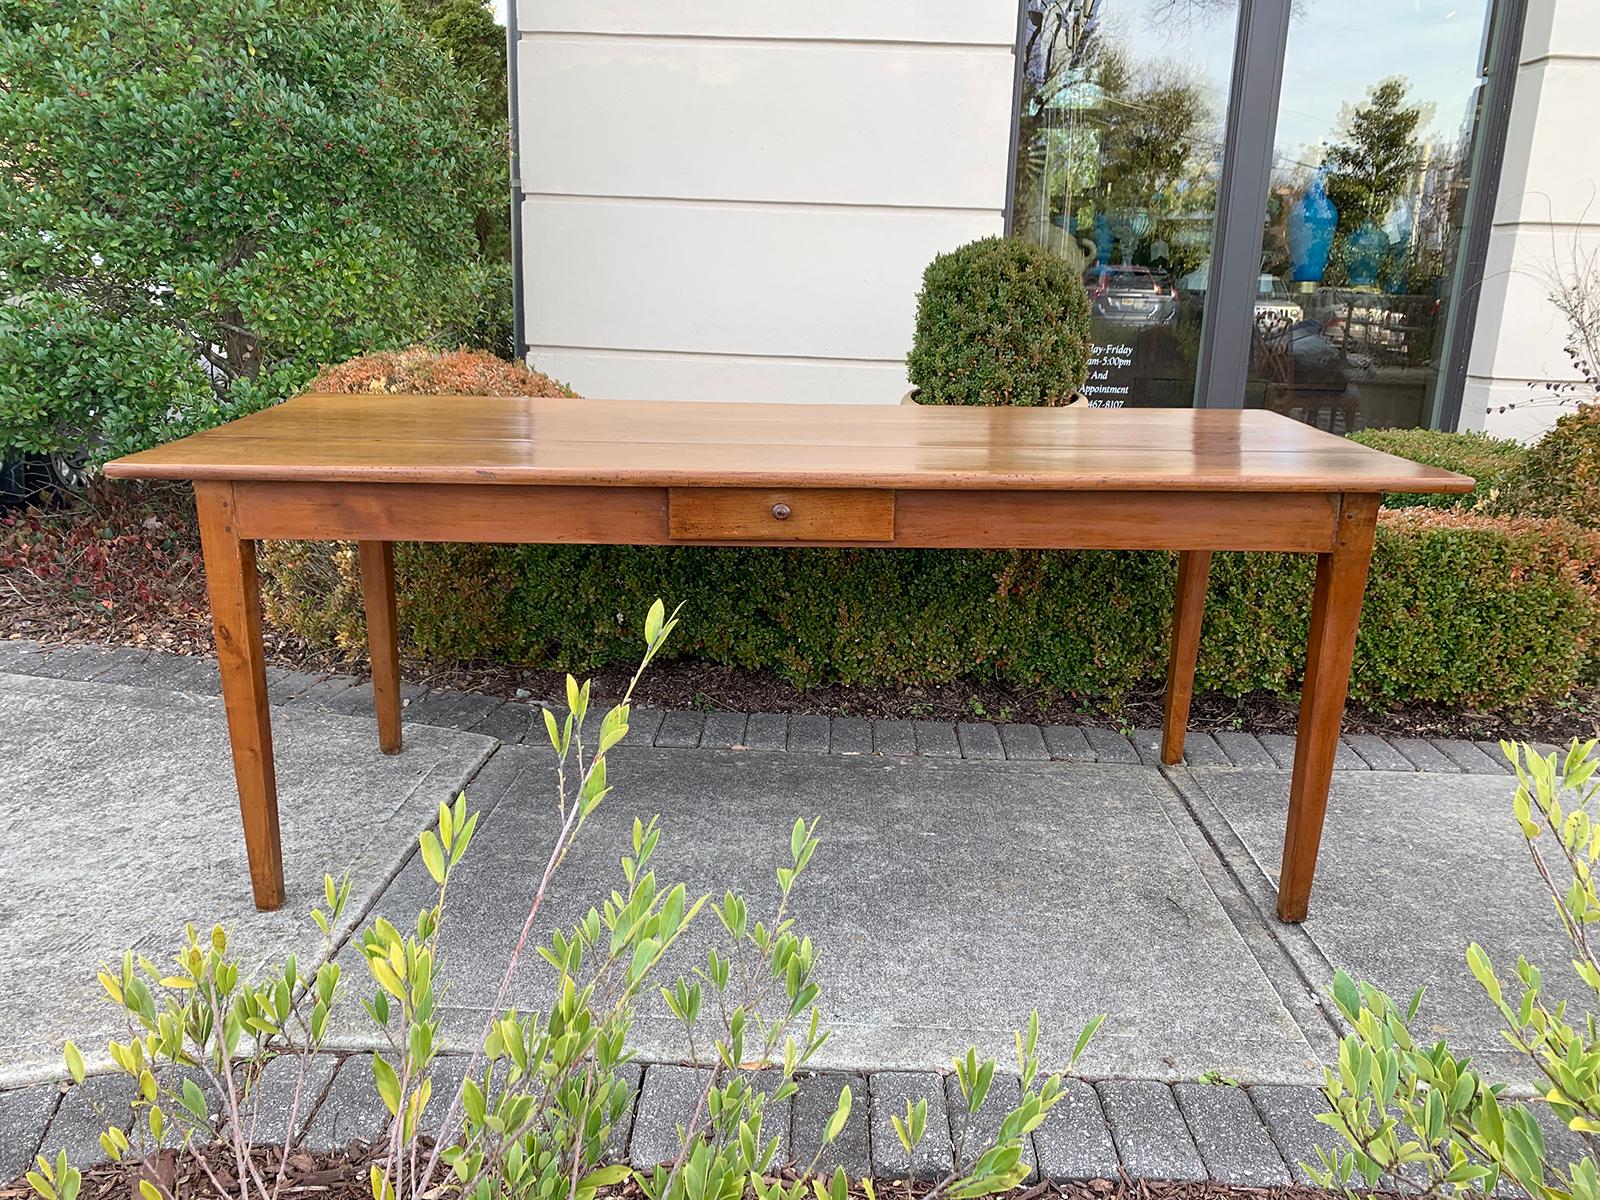 19th century French walnut farm table, one drawer, one slide
Great wood / patina
Overall:78.5